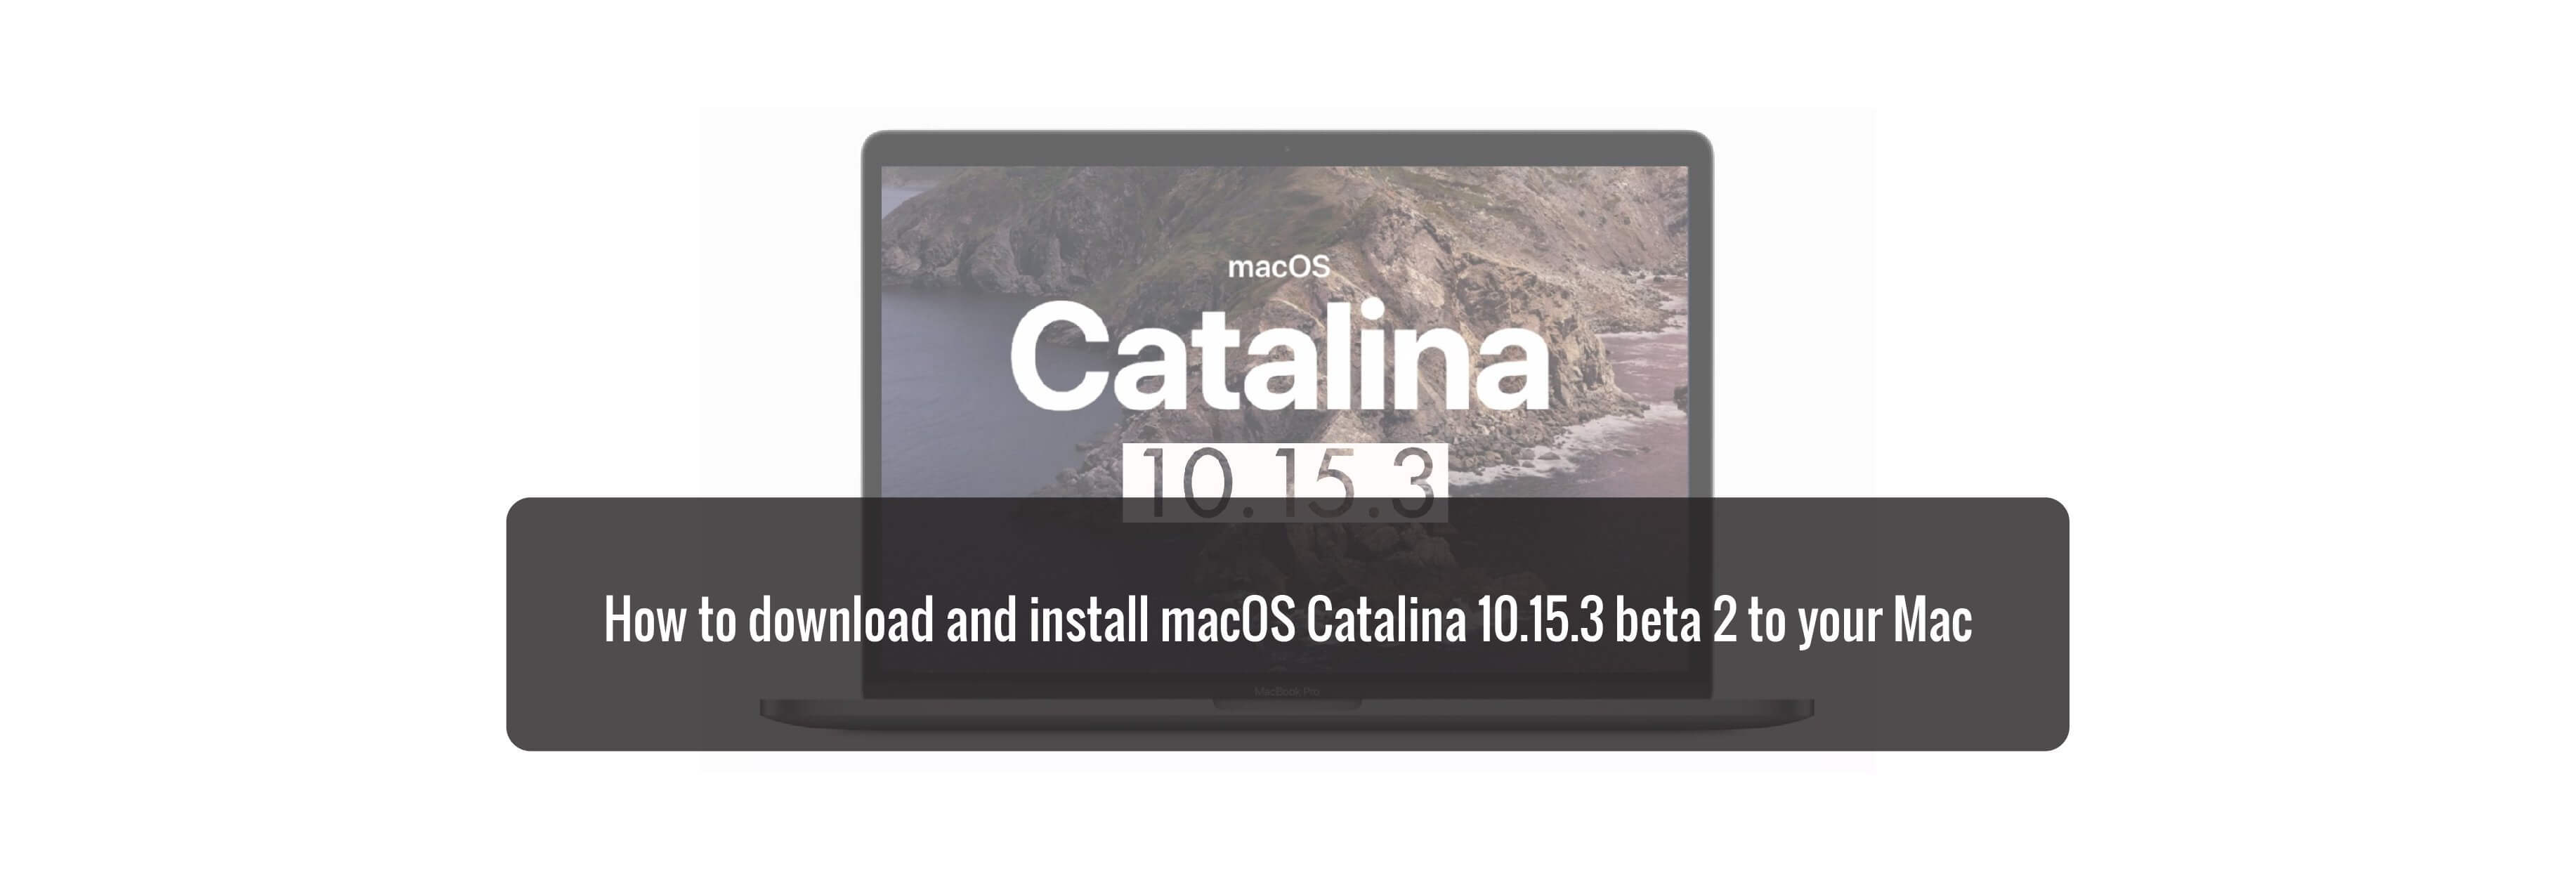 How to download and install macOS Catalina 10.15.3 beta 2 to your Mac